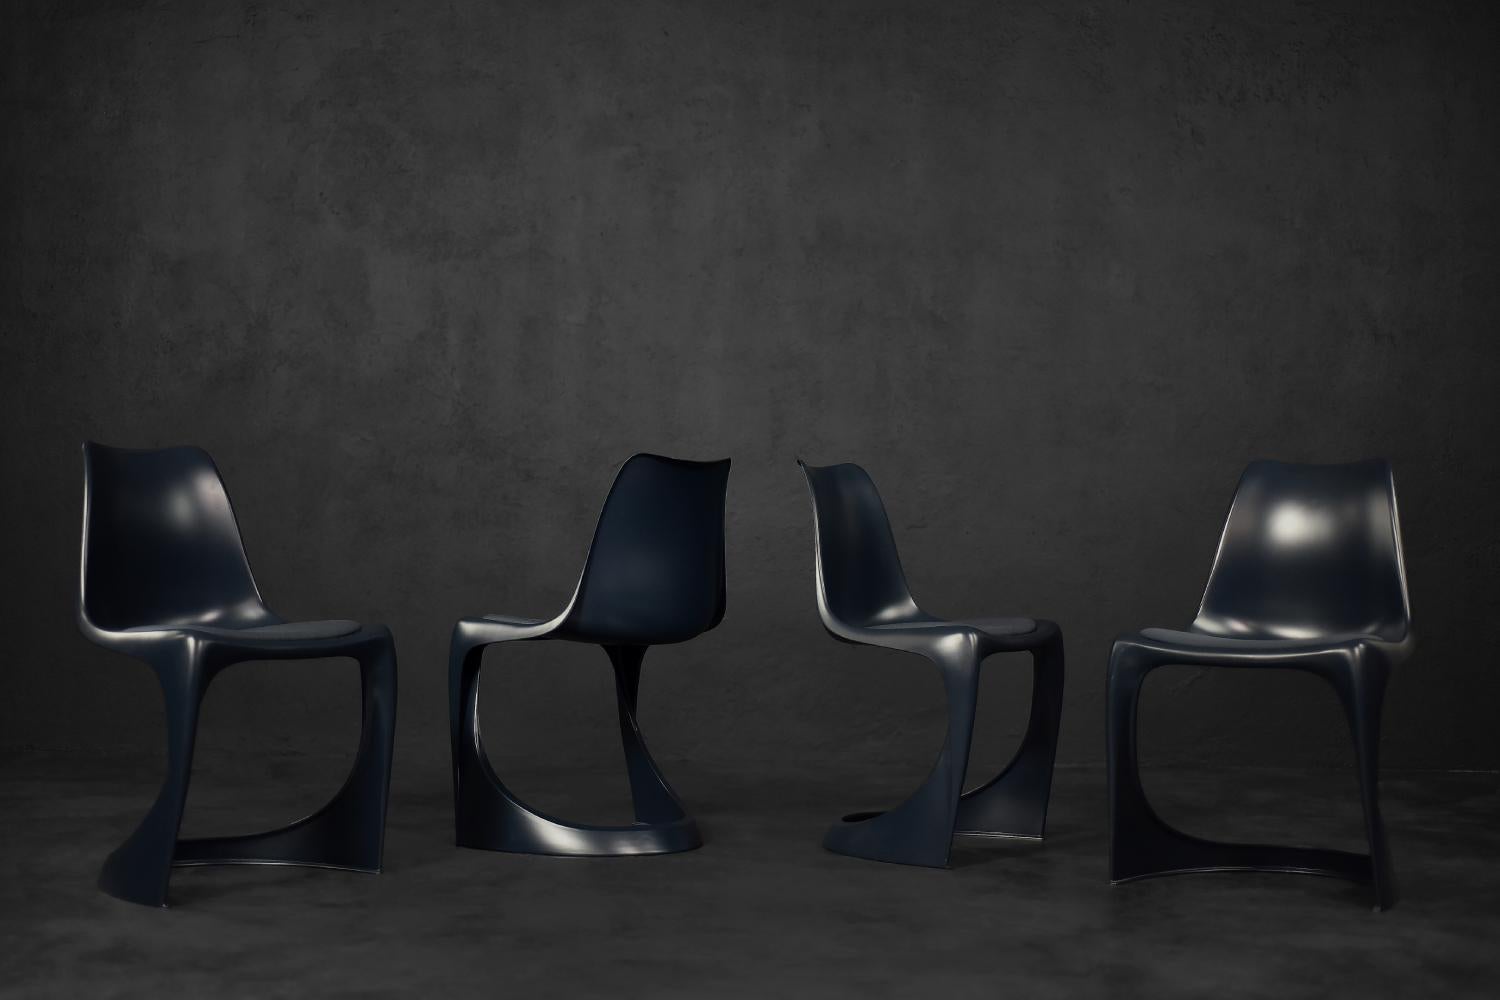 This set of four iconic Modo 290 cantilever chairs was designed by architect and designer Steen Østergaard in 1966. Modo 290 is a one-piece shell chair with a design that still exudes futurism and clean design lines. The chairs are made of polyamide